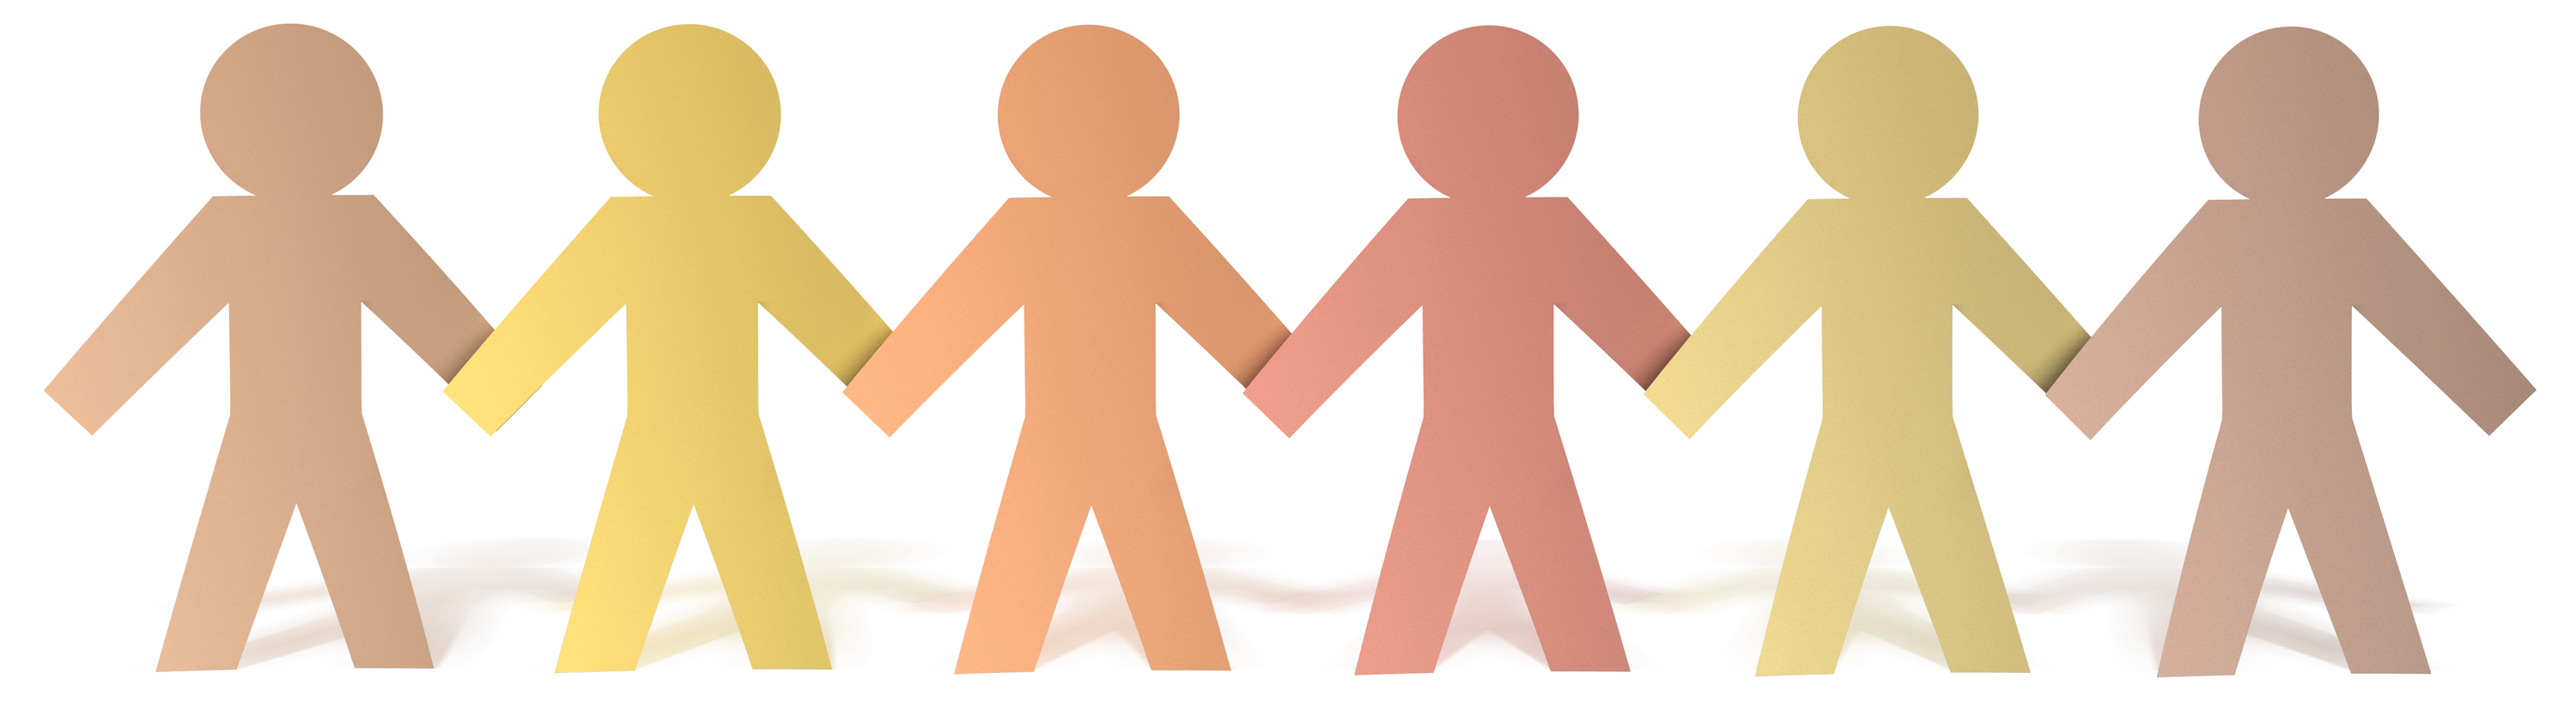 People Holding Hands Png & Free People Holding Hands.png Transparent.